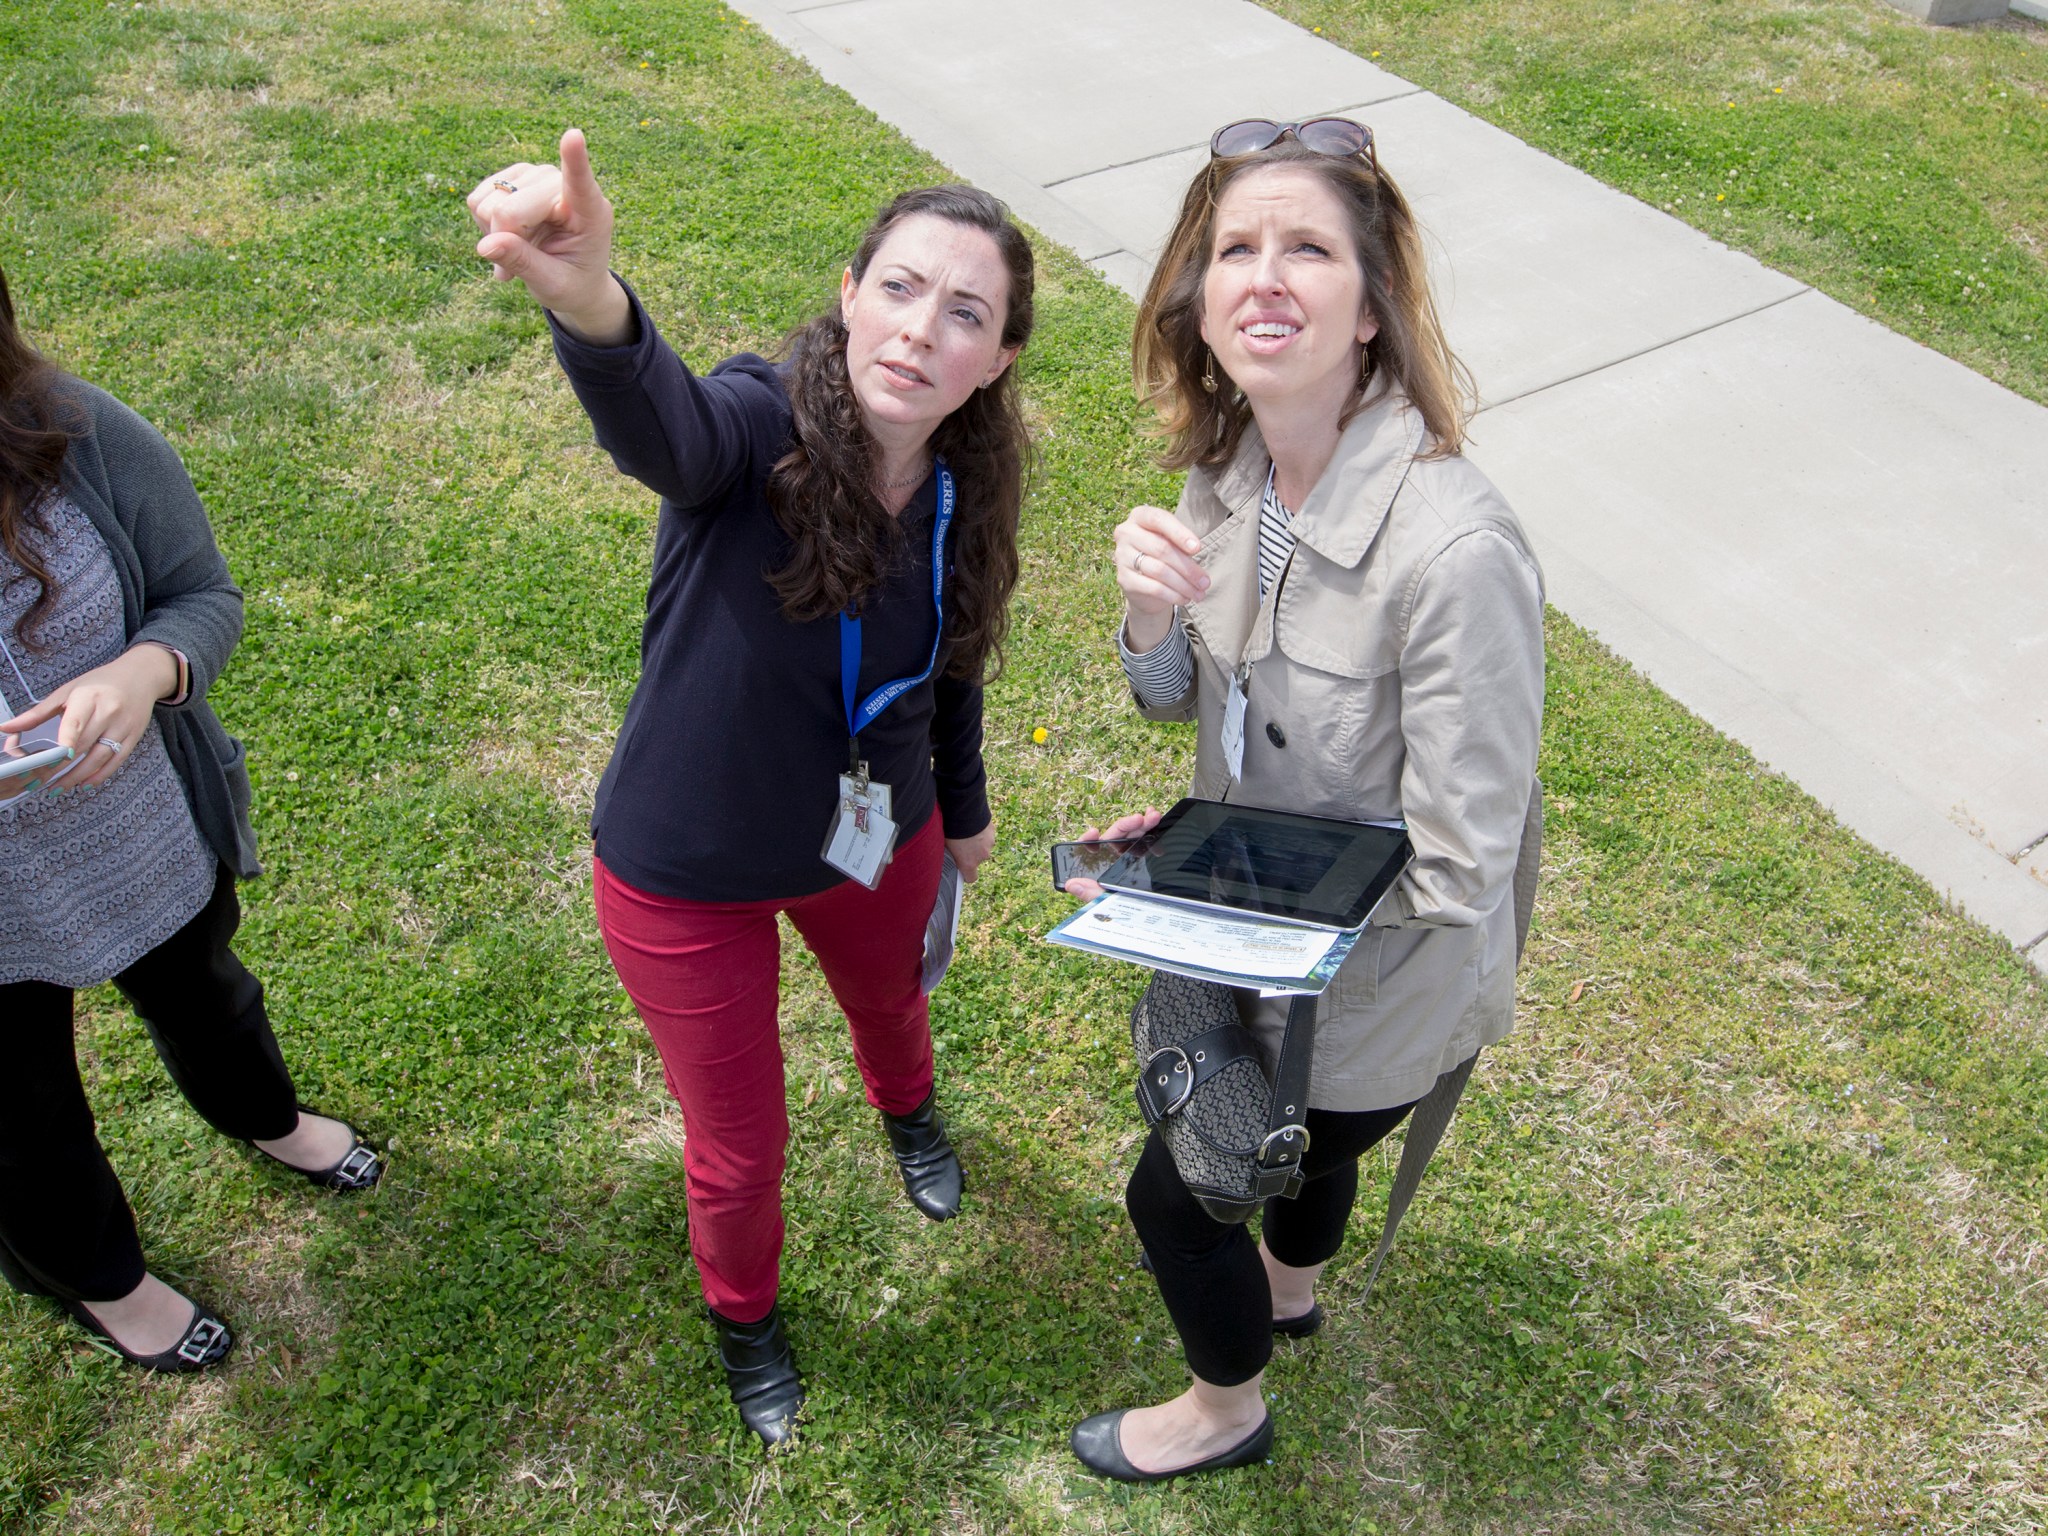 NASA Langley physical scientist Jessica Taylor shows local teachers Monday how to observe clouds via the GLOBE program.